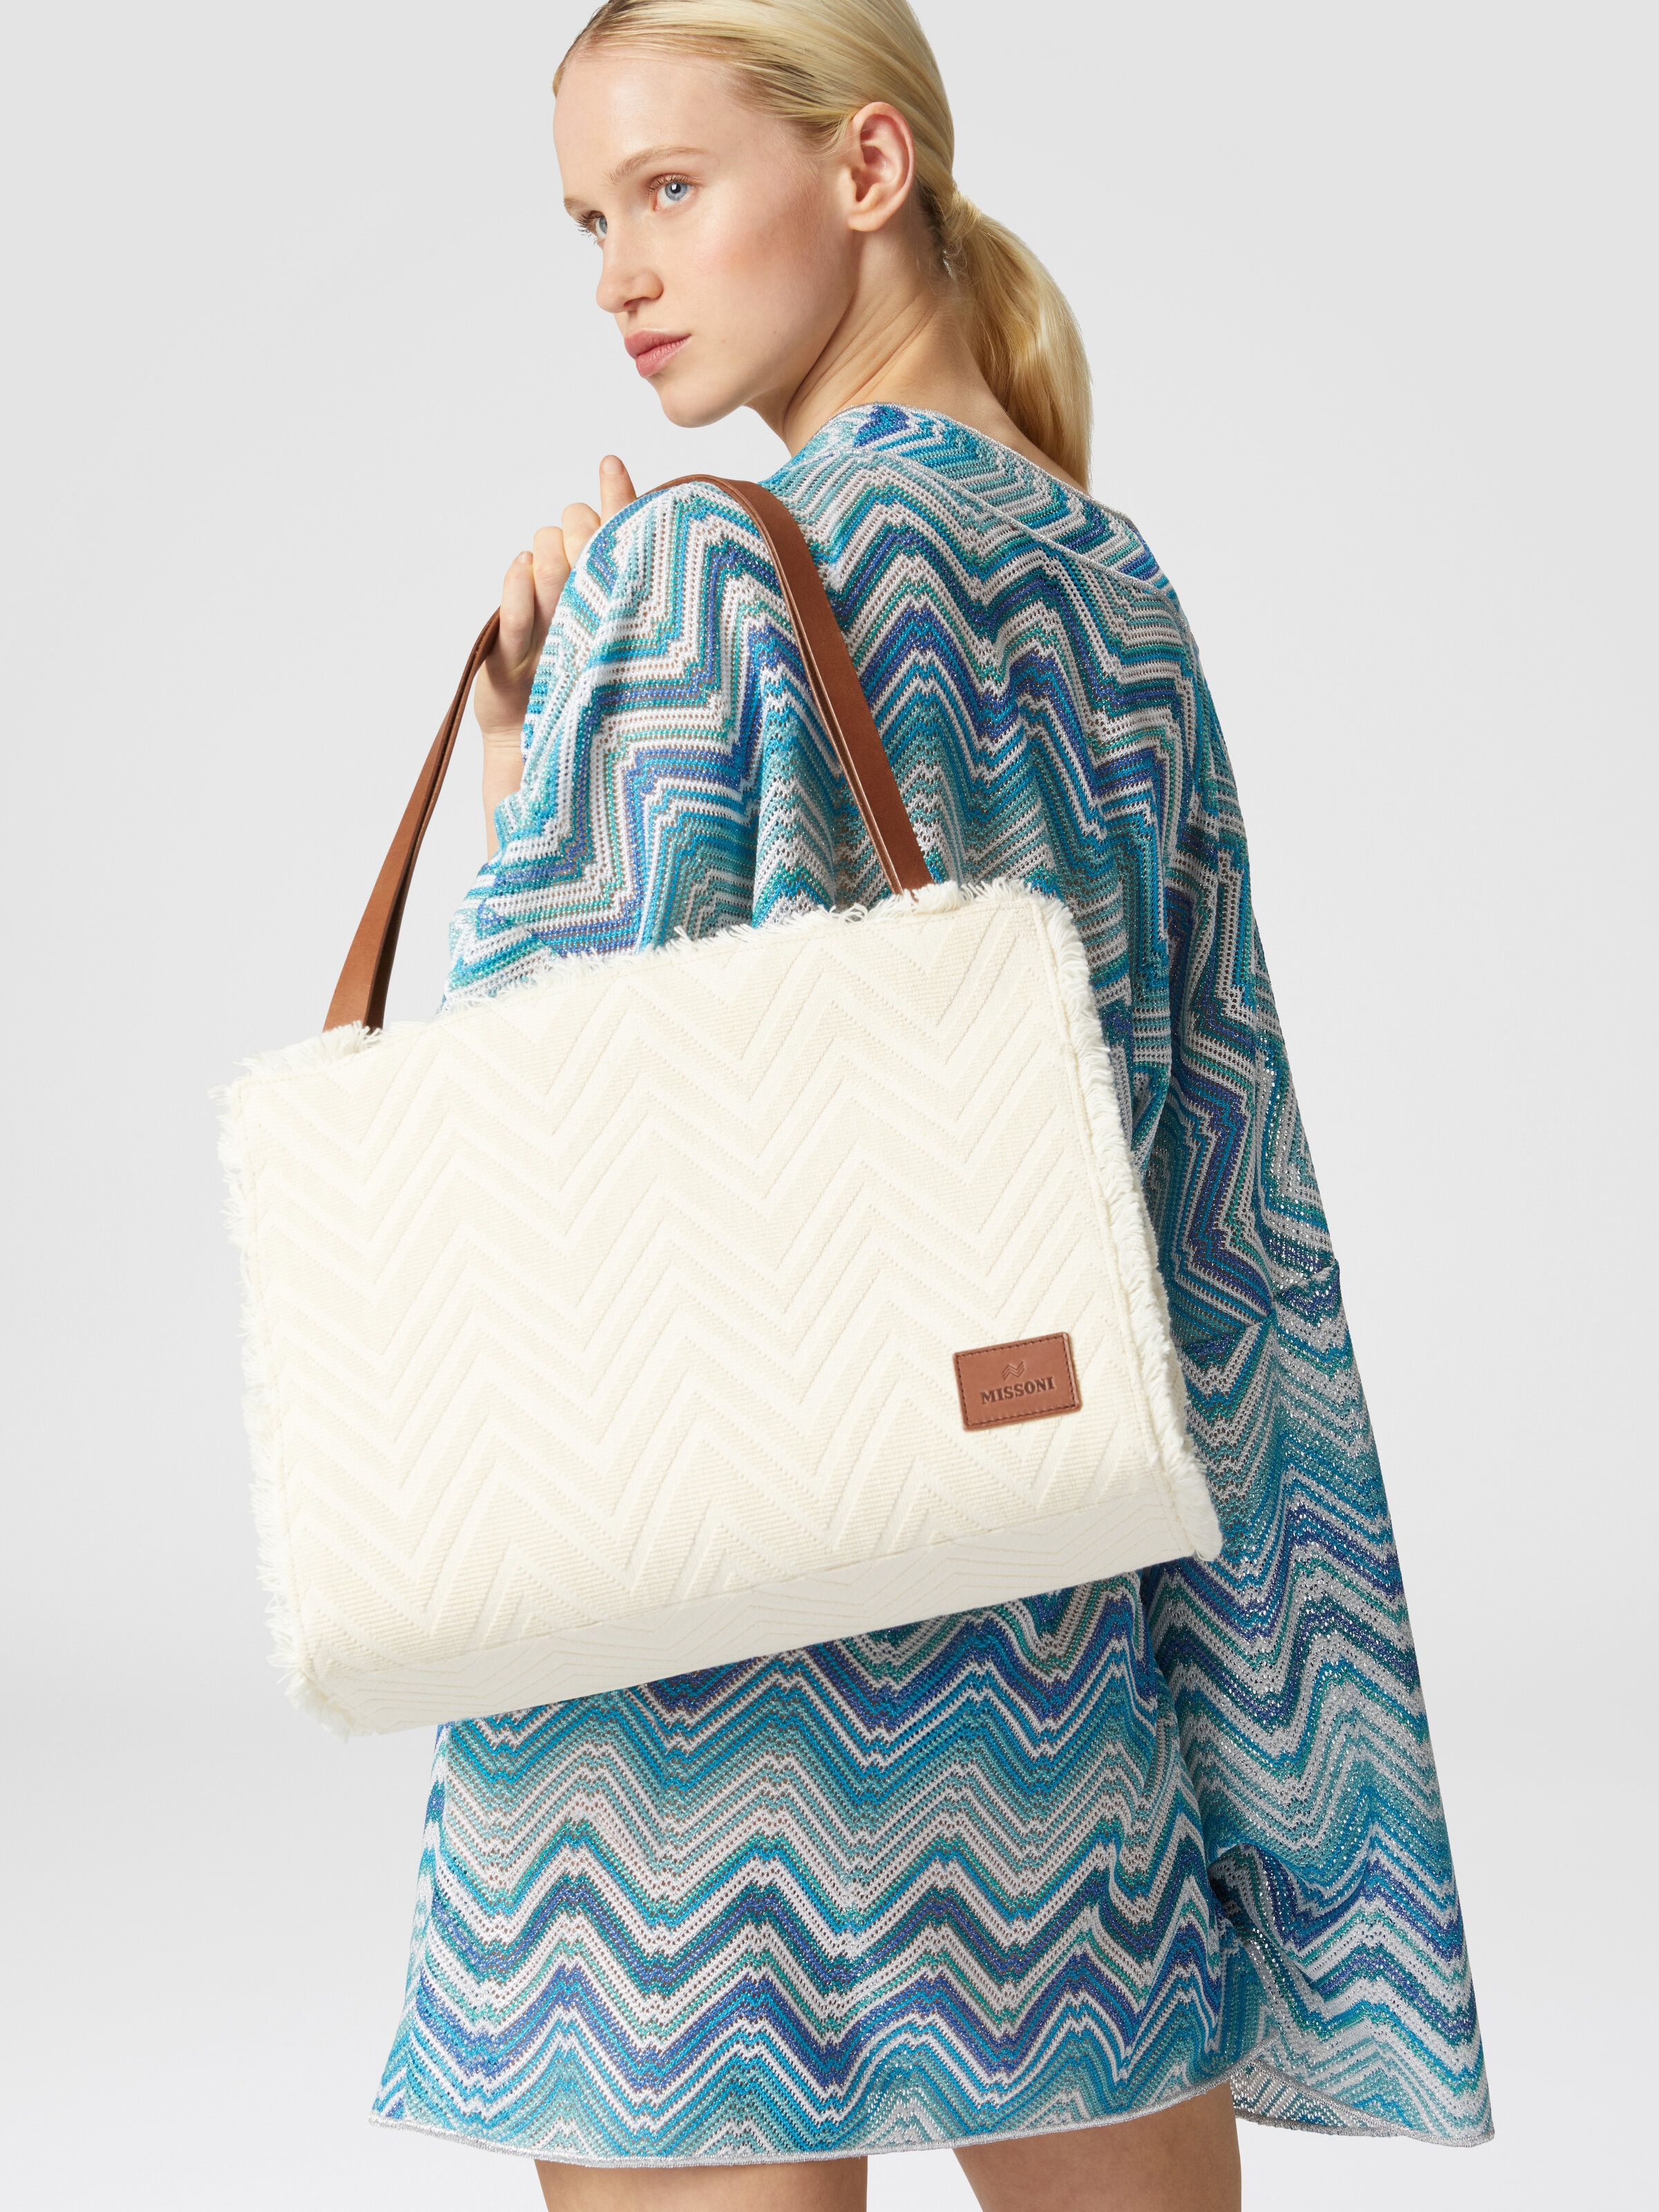 Tote bag in cotton blend with chevron pattern, Brown - 4